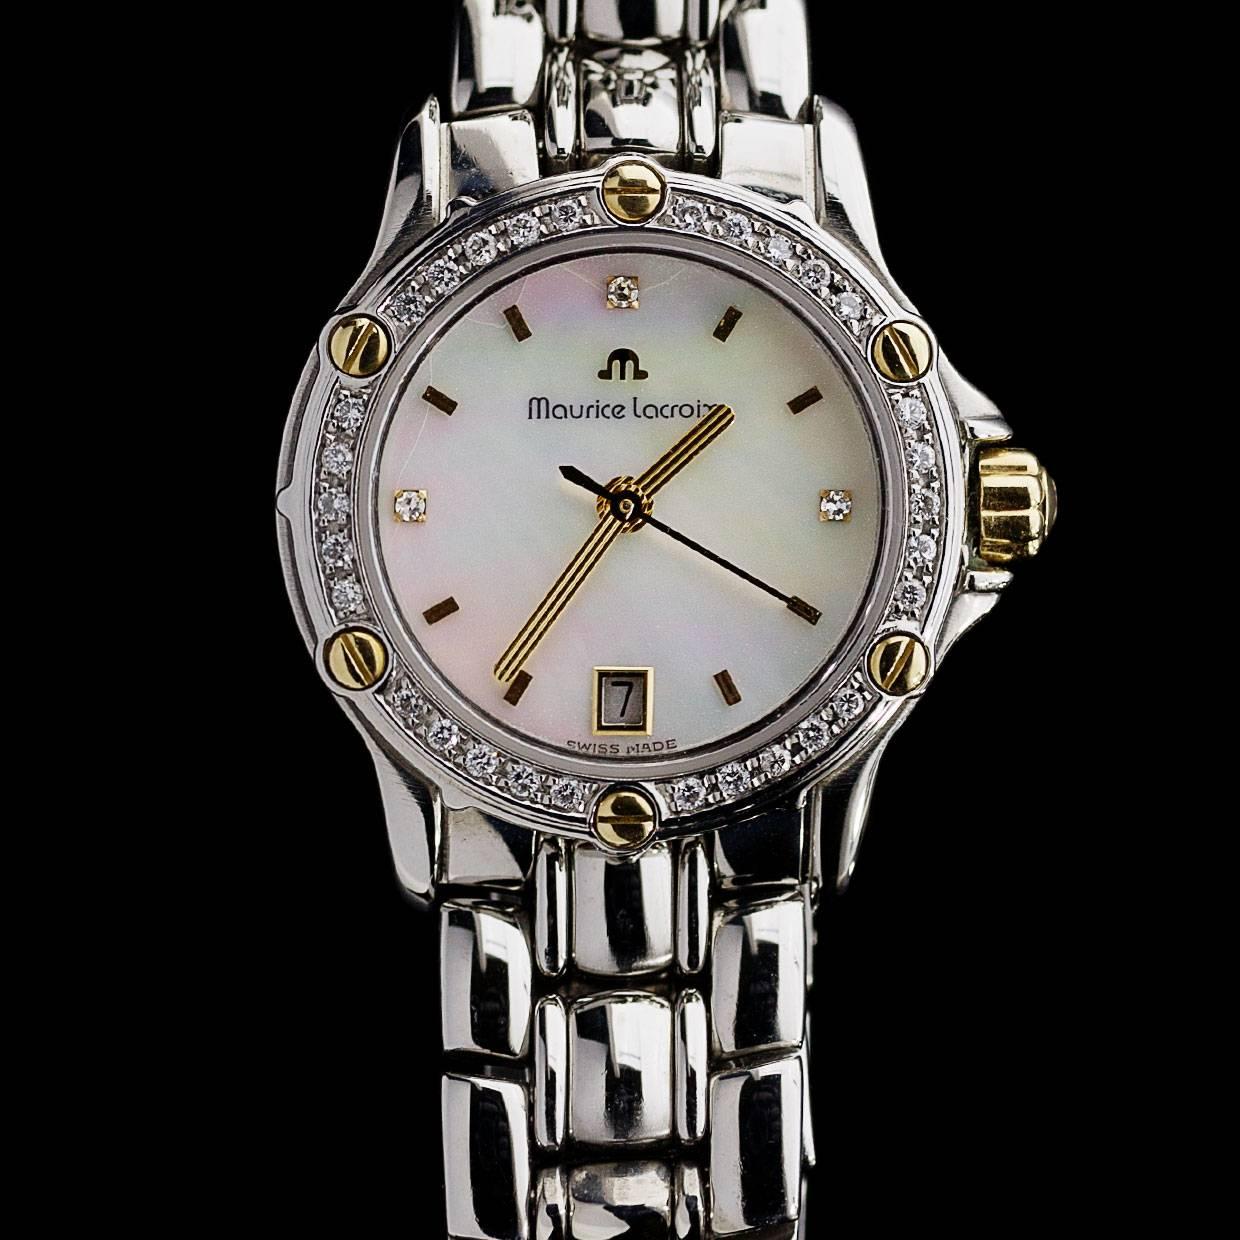 This is a beautiful stainless steel and 18K yellow gold Maurice Lacroix watch from the Tiago collection. Thirty-three glittering diamonds are set in the bezel and dial of this elegant timepiece. The watch also features 18 karat yellow gold screws,